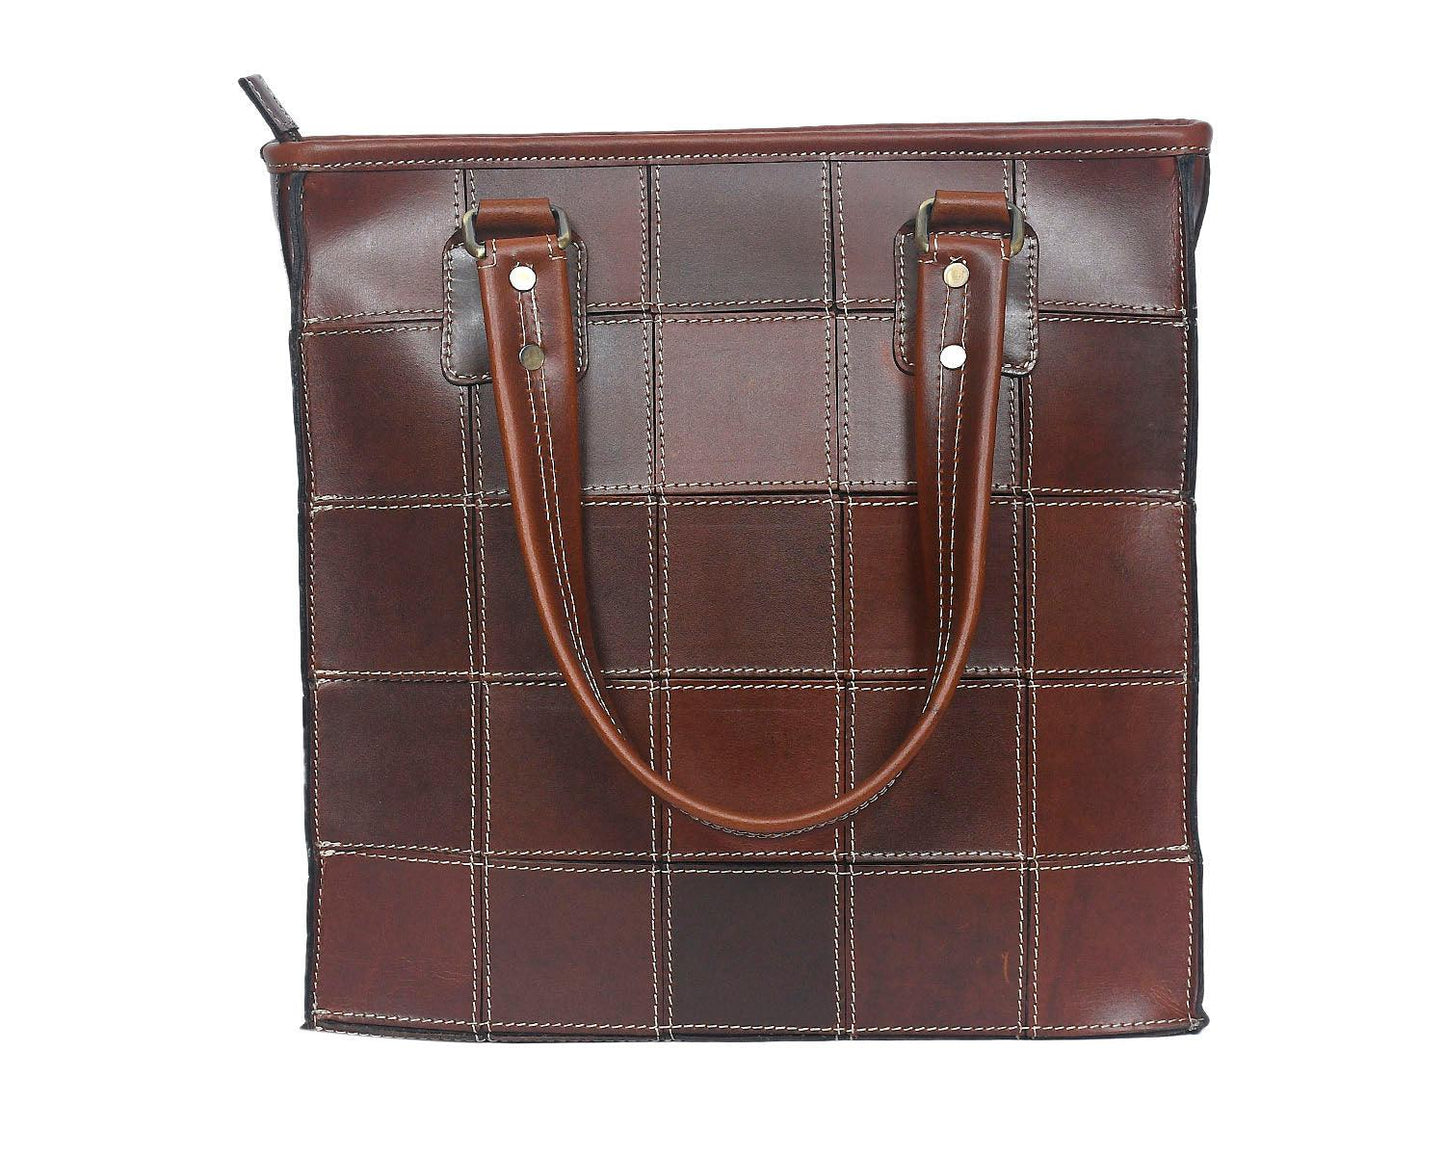 Celtic Boxy Tote Bag For Women's Girls | Party | Event | Gift | Mothers day | Brown Tote Bag - CELTICINDIA